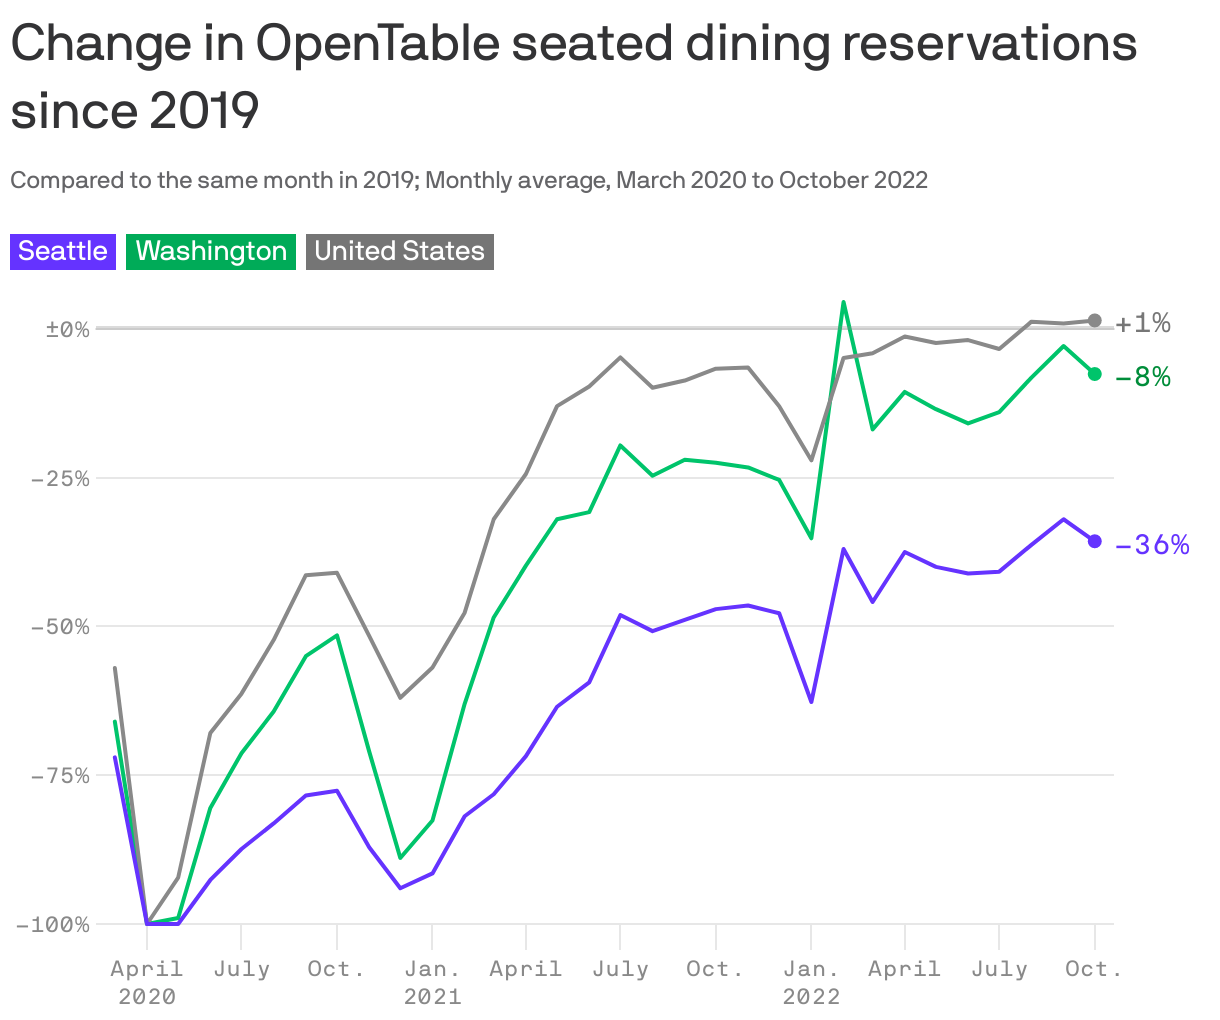 Change in OpenTable seated dining reservations since 2019